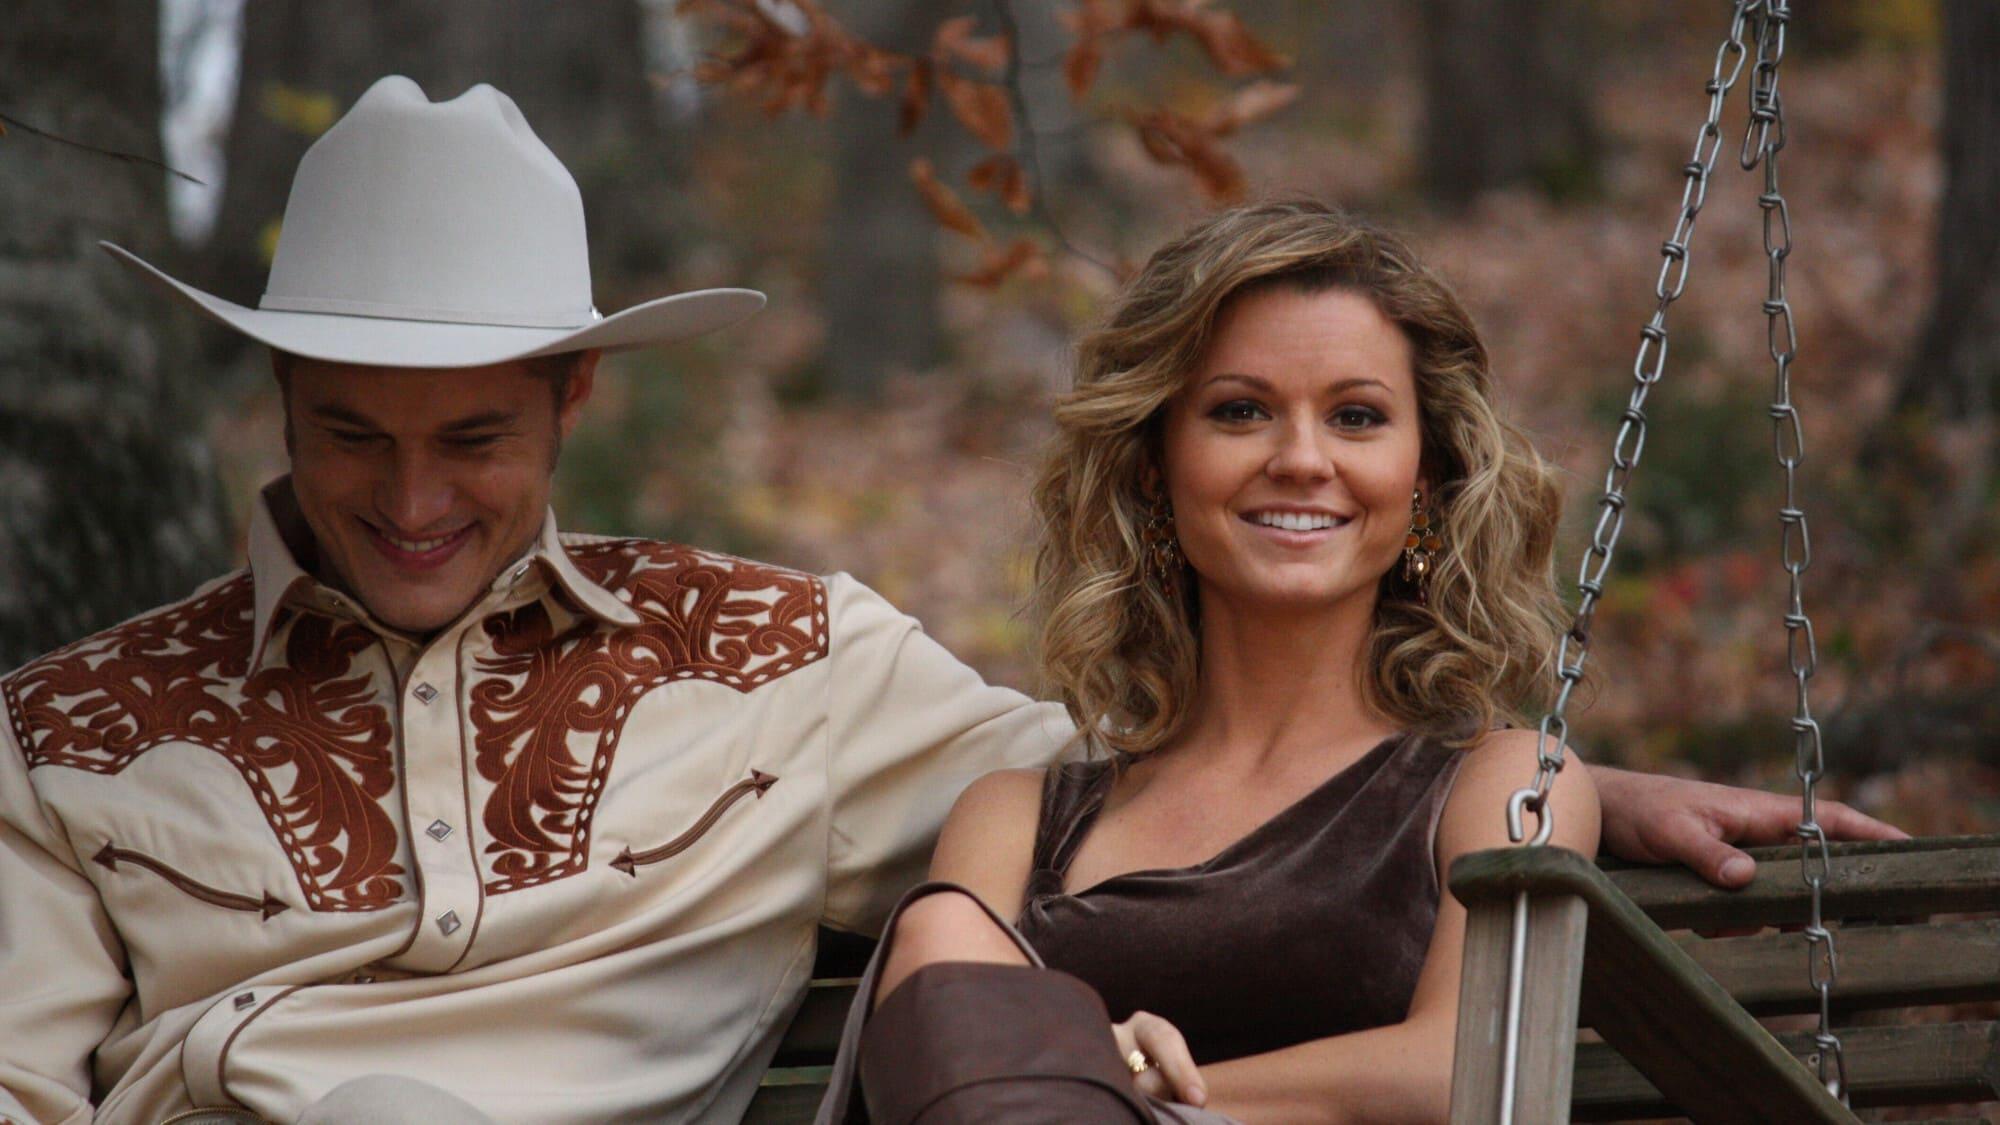 Pure Country 2: The Gift backdrop